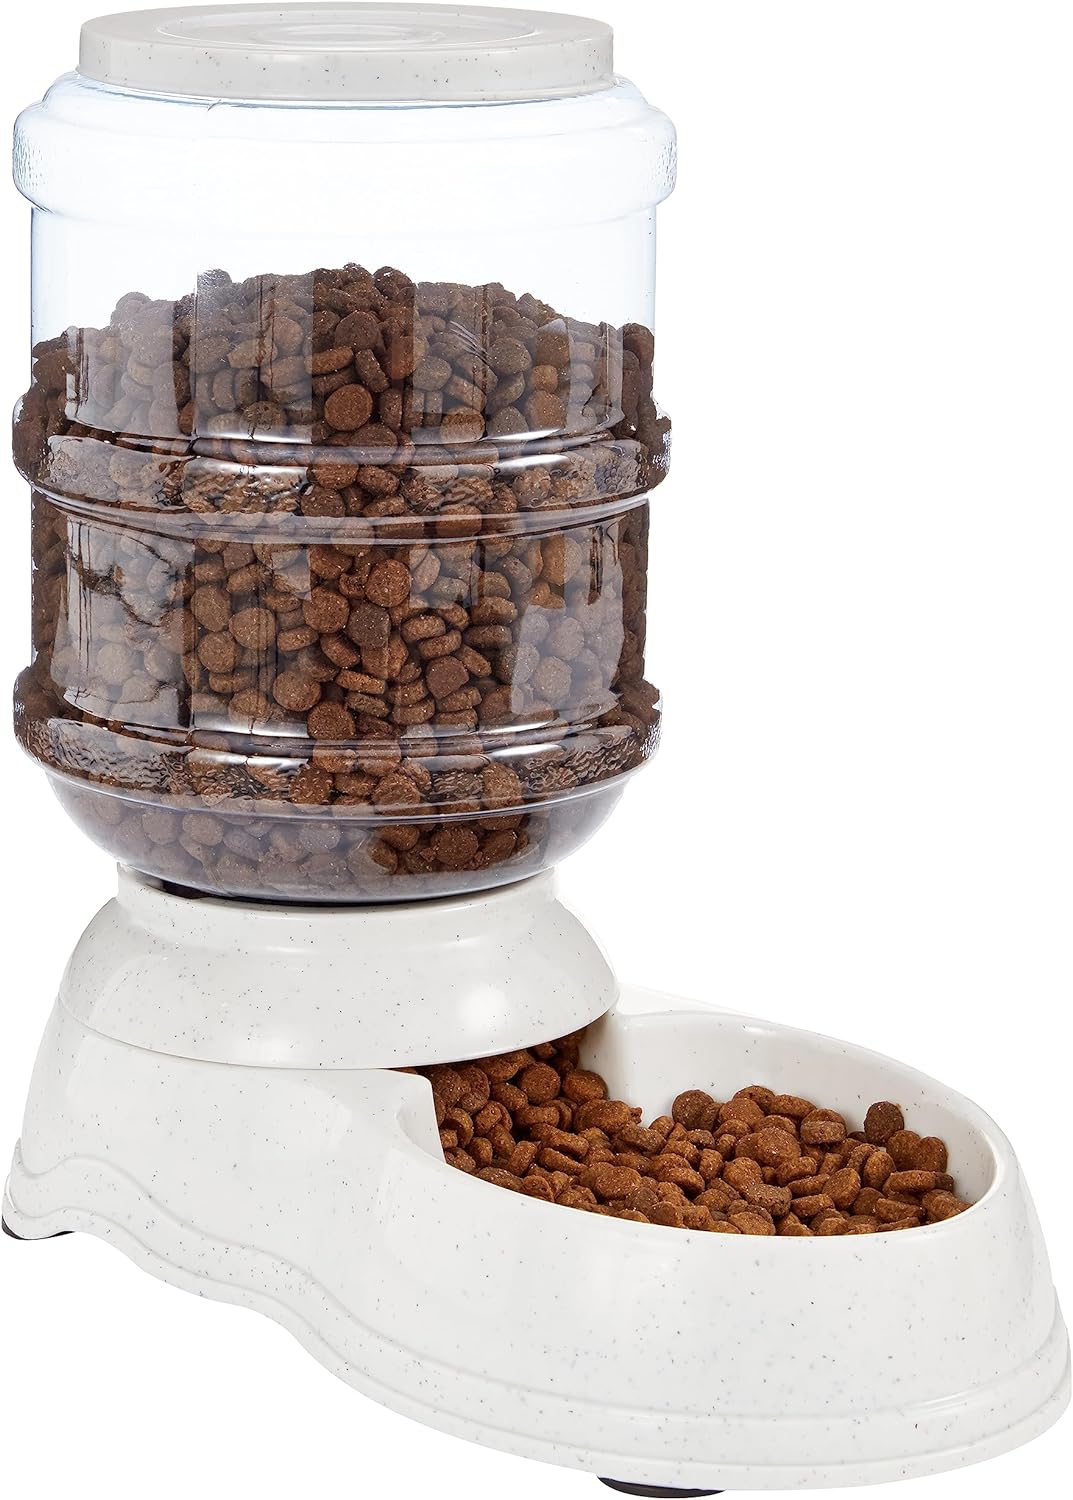 Amazon Basics Gravity Pet Food Feeder for Dogs and Cats, Small, 6-Pound Capacity, Gray